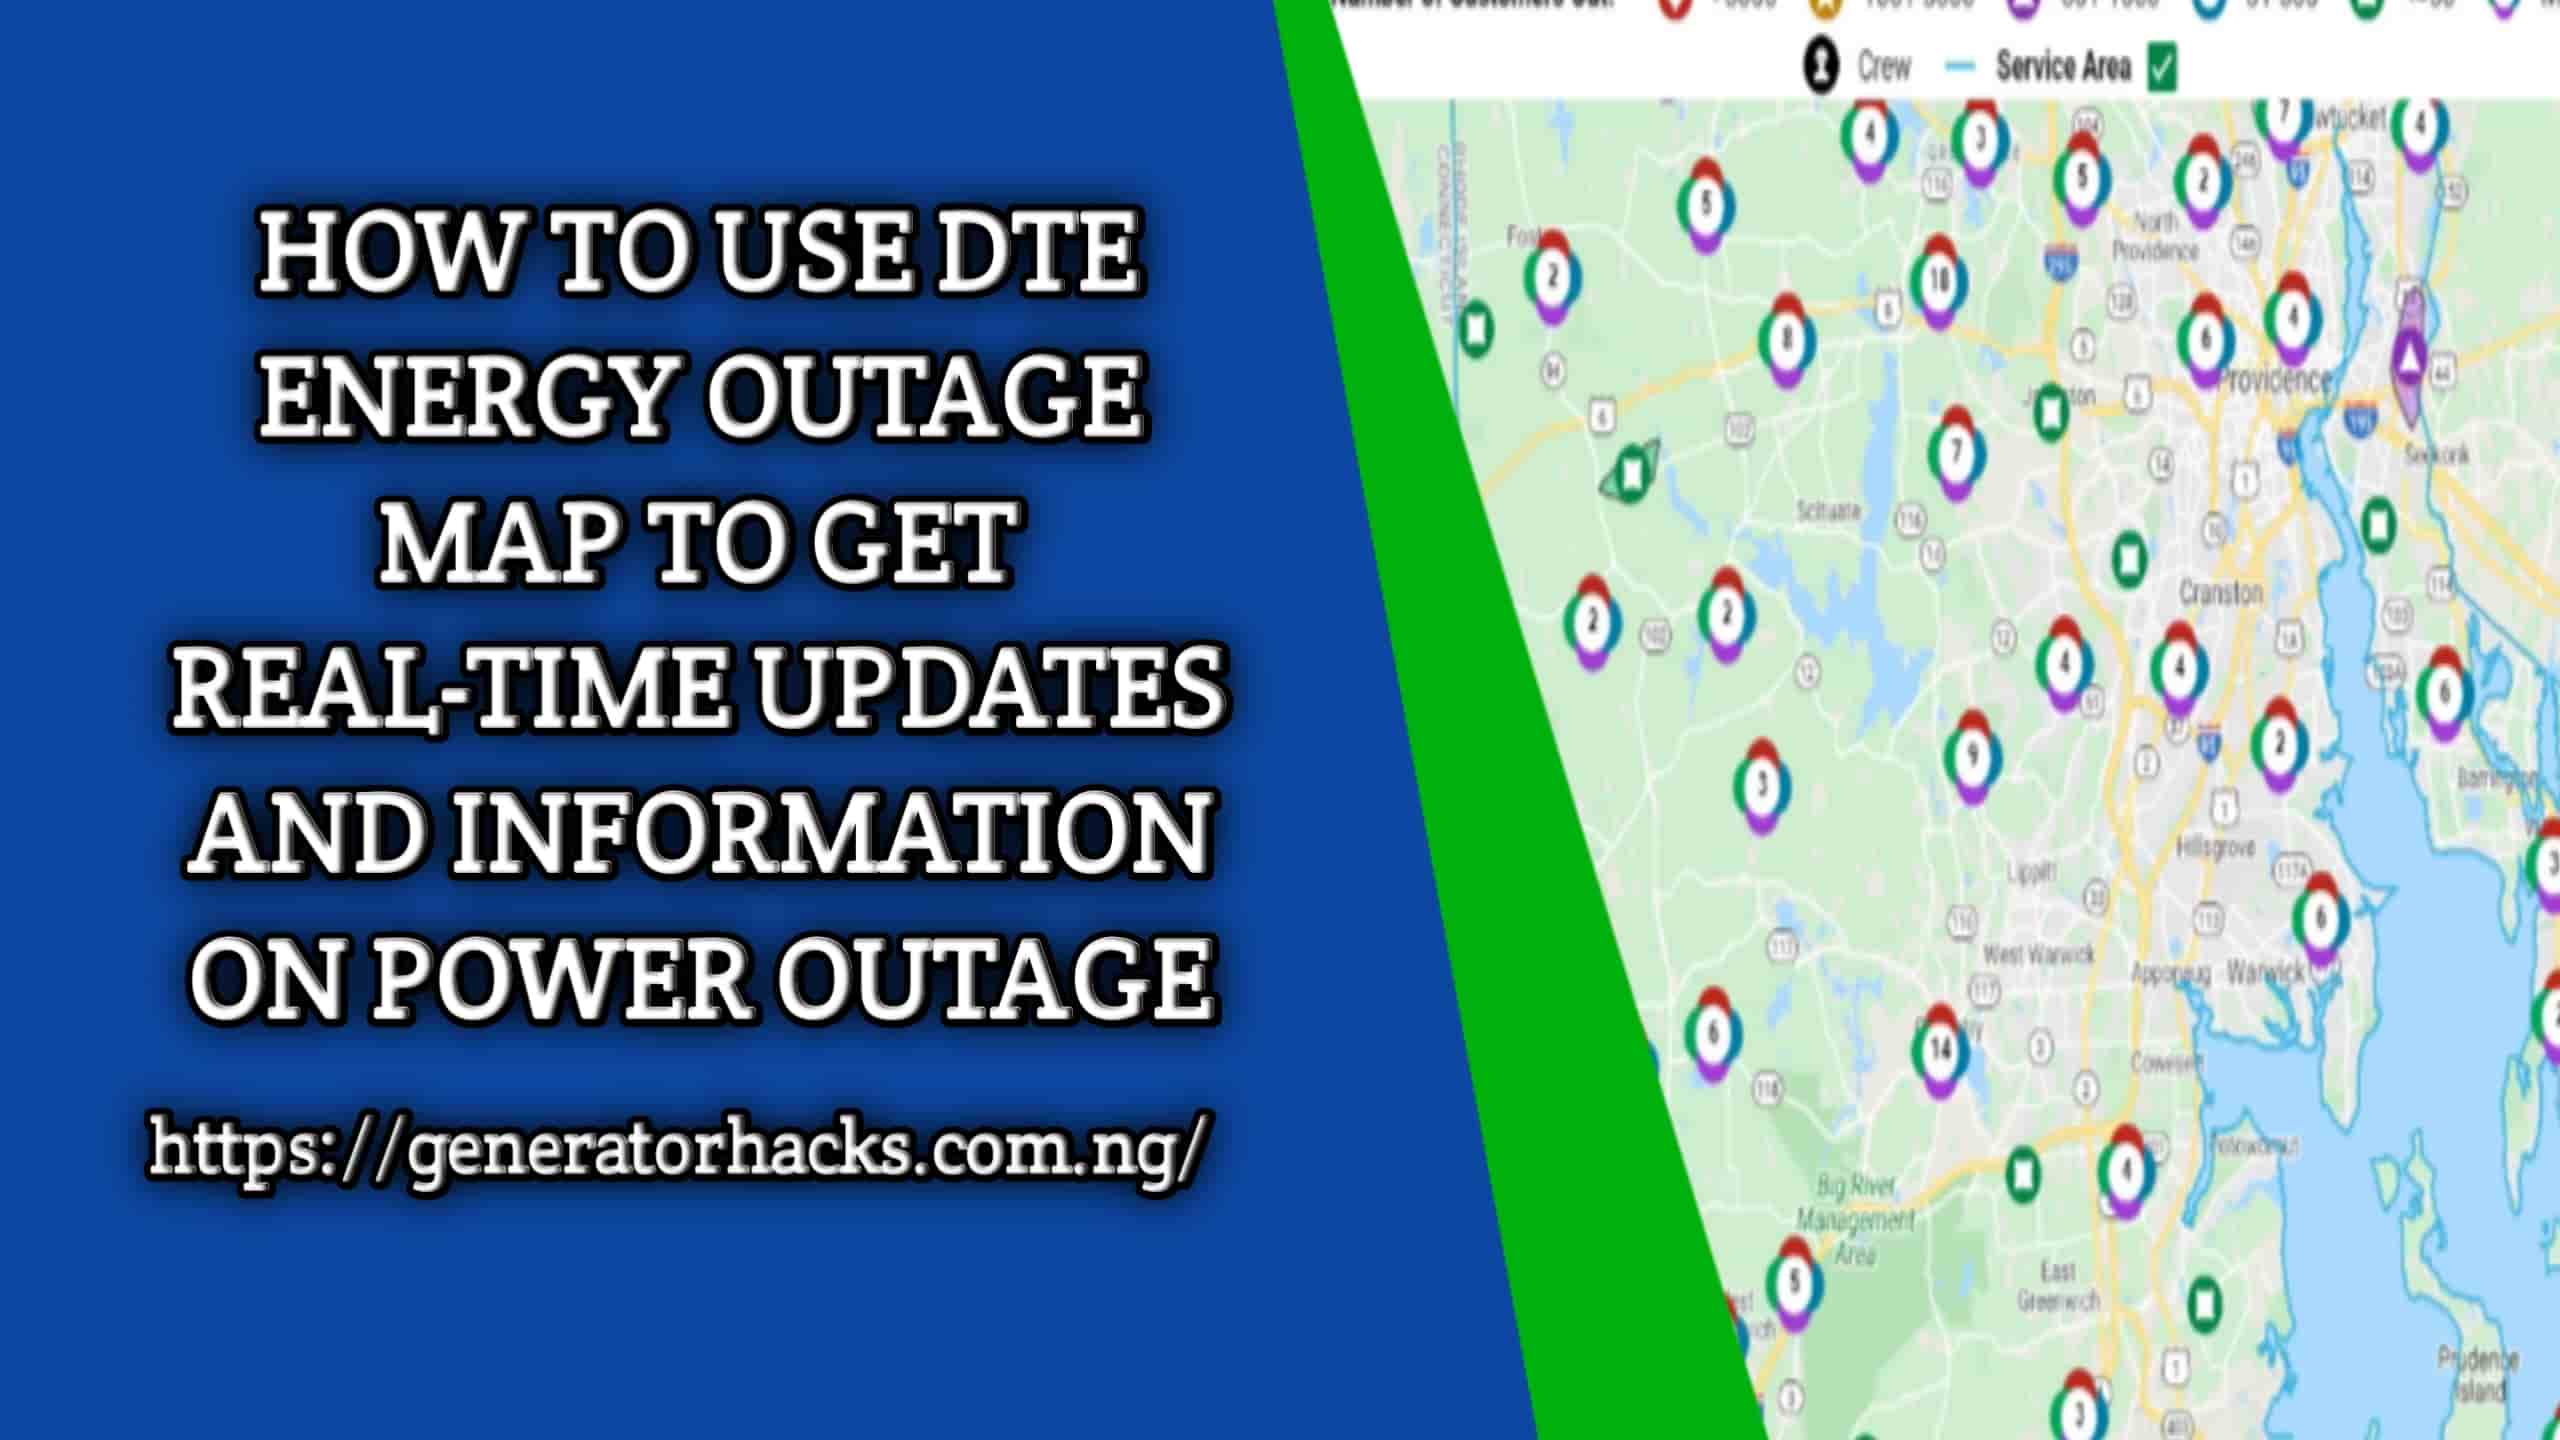 DTE energy outage map,